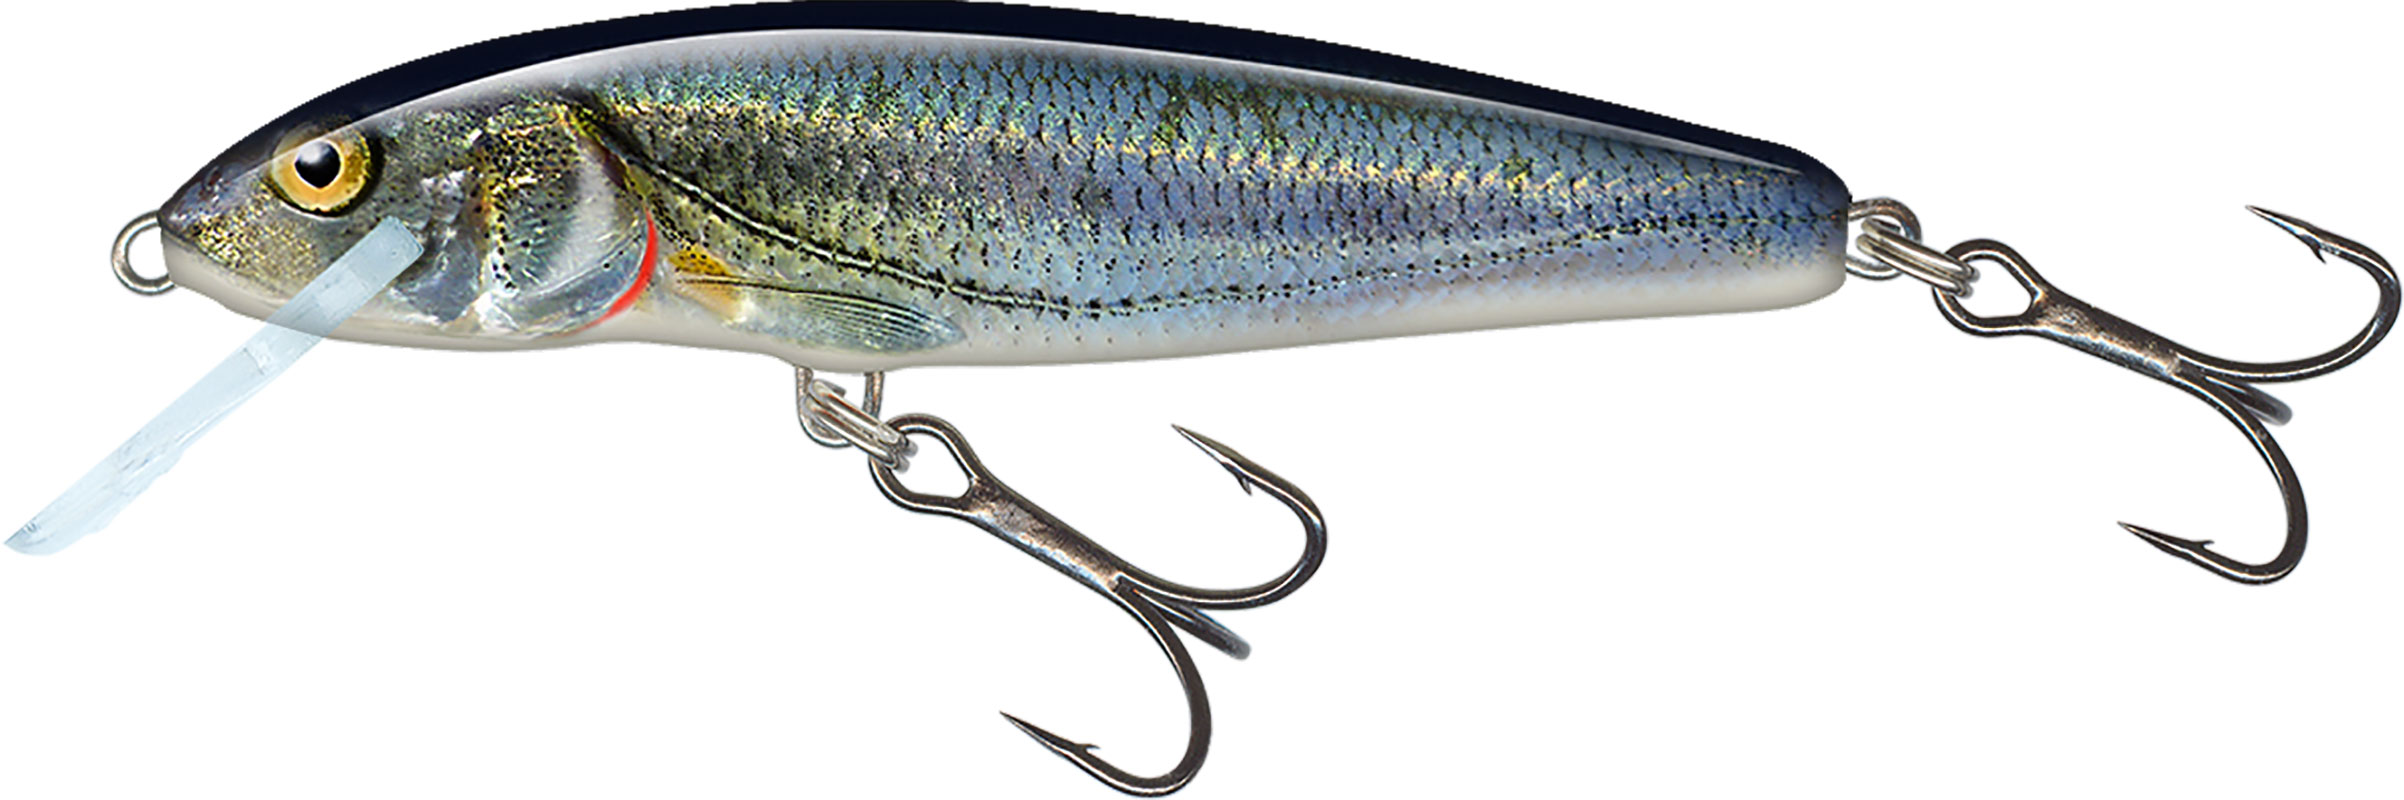 Details about   Salmo Trout Fishing Lures Minnow Crankbait Floating Sinking 5cm 7cm Chub Perch 